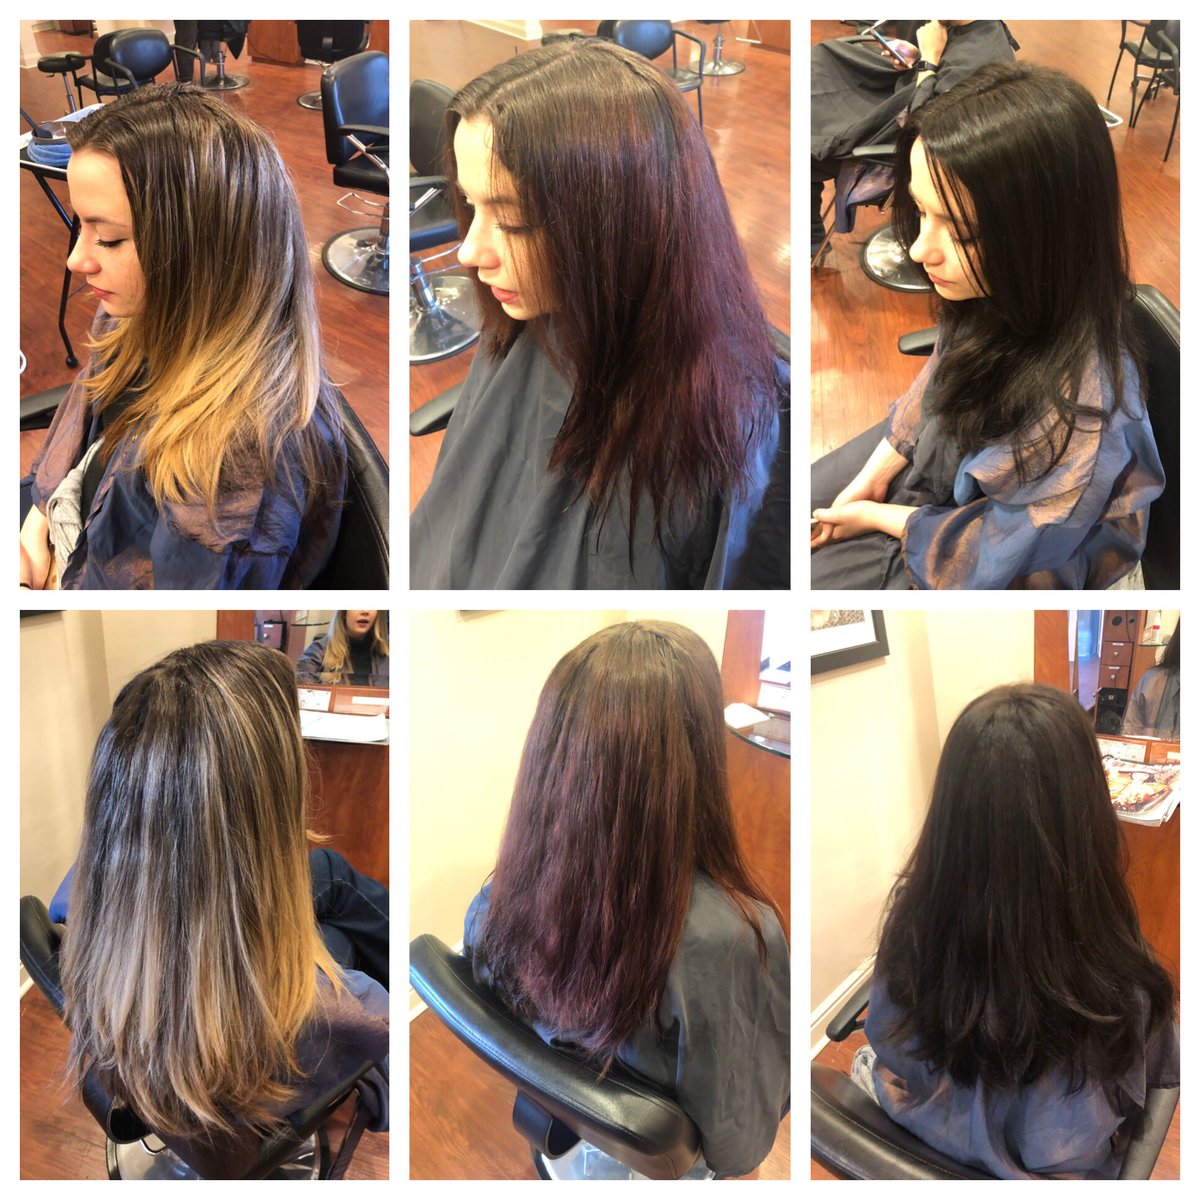 Corrective colour- guest wanted a rich dark chestnut. We had to fill the blonde with missing pigment then reapply with the dark chestnut. This process took about 3.5 hours.
Stylist Lauren, Gabe and Olive. #HairColor #PittsburghStyle